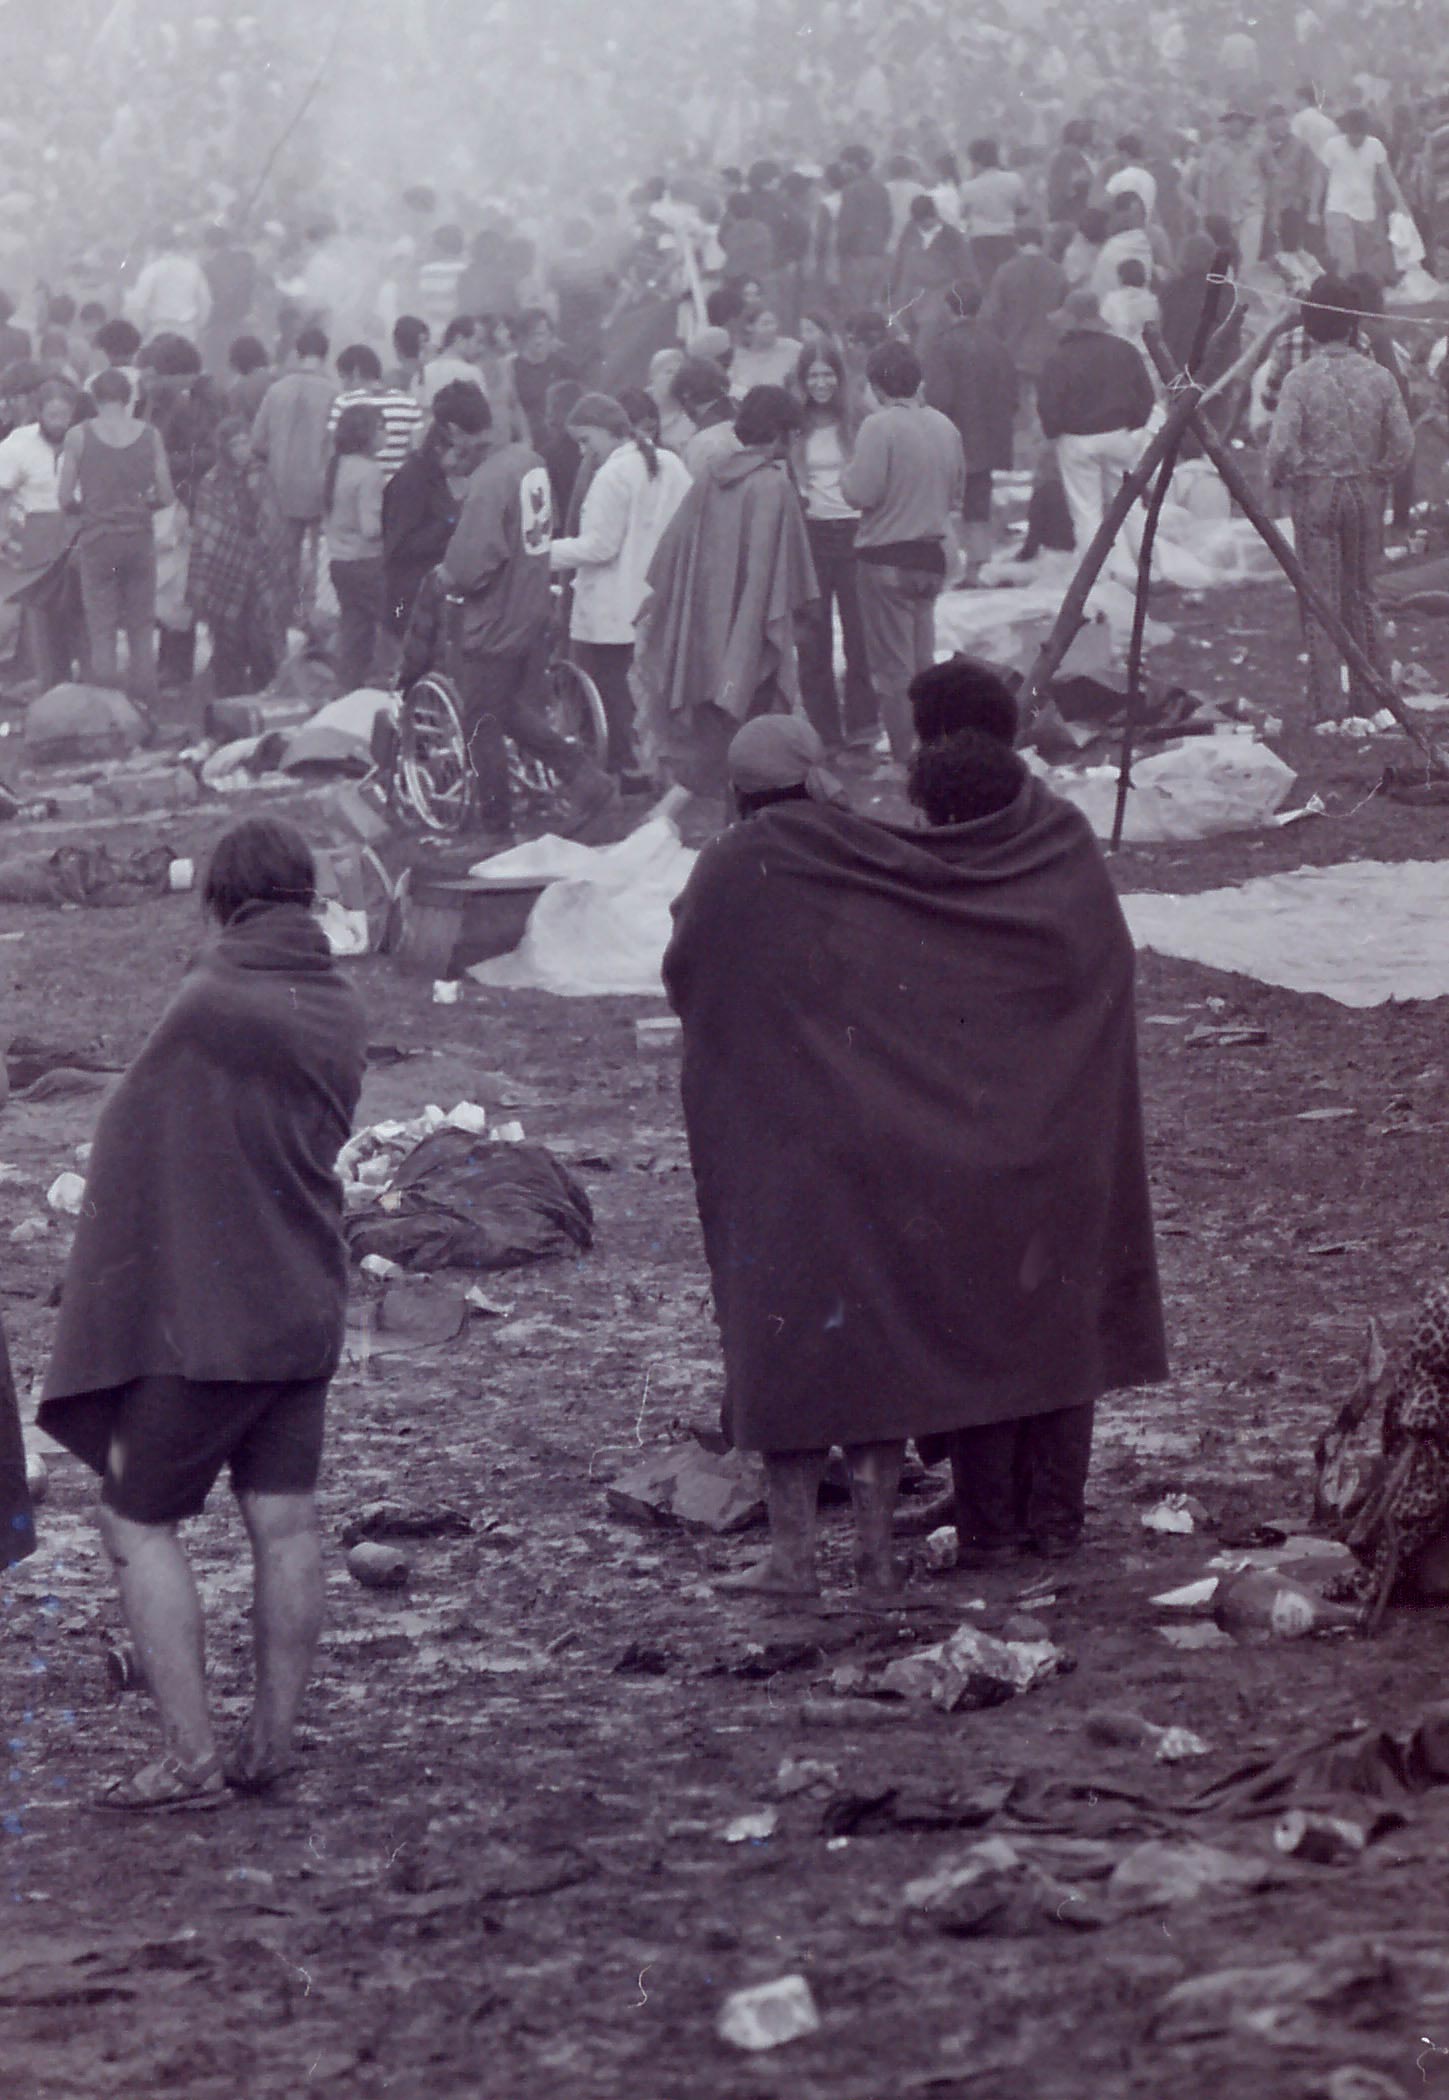 Black and white image of people at woodstock